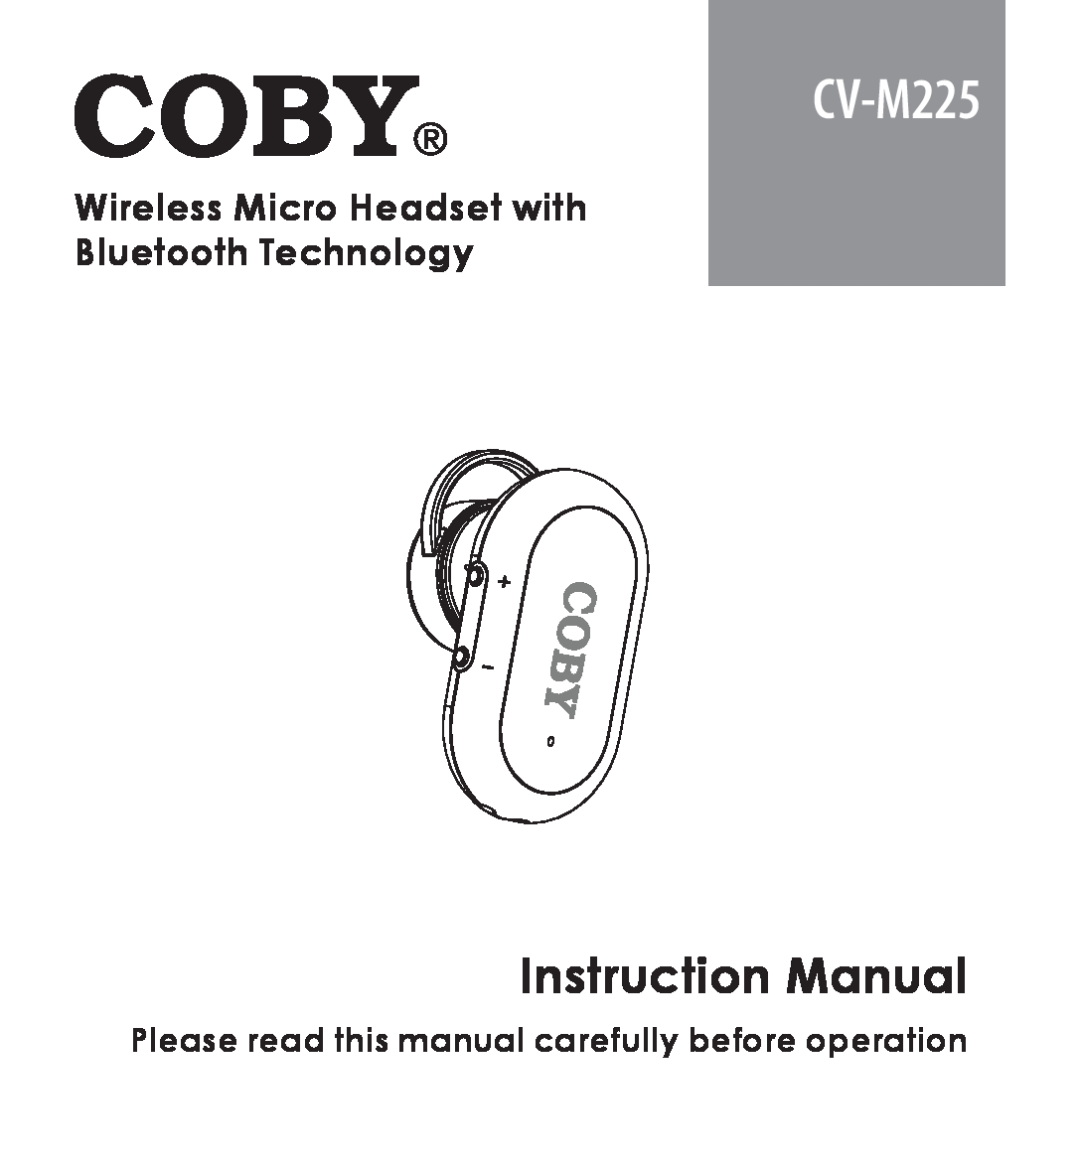 COBY electronic CV-M225 instruction manual Wireless Micro Headset with Bluetooth Technology 